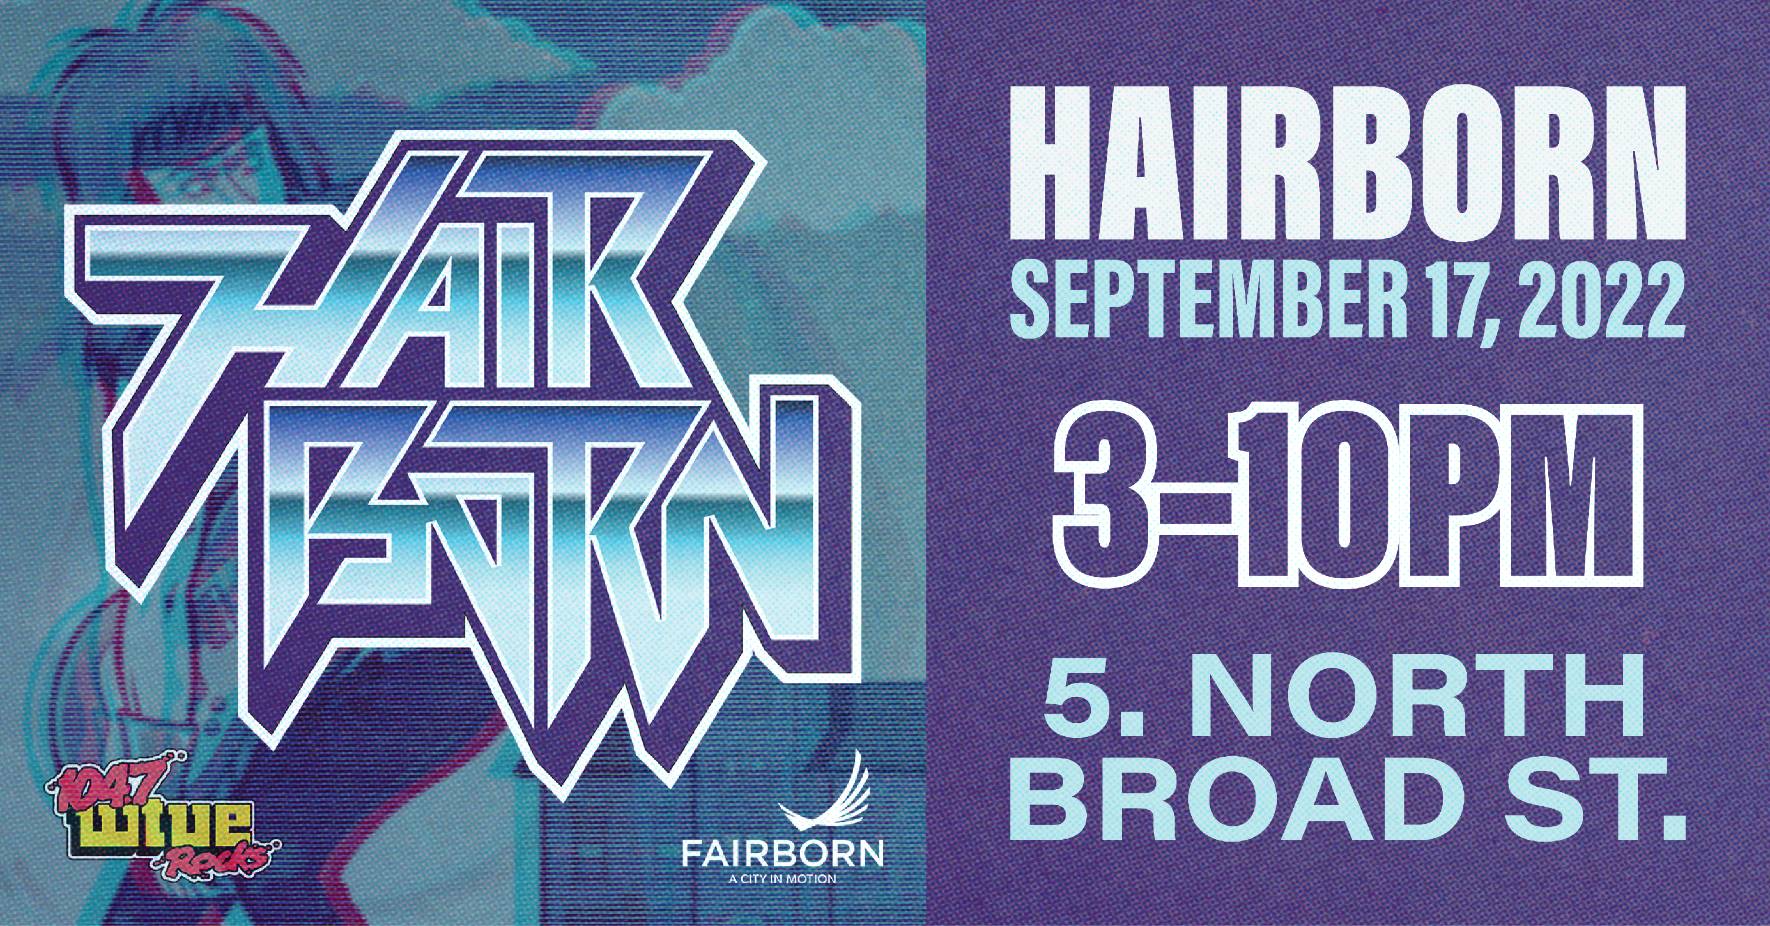 Hairborn Facebook Event Cover Photo - Copy